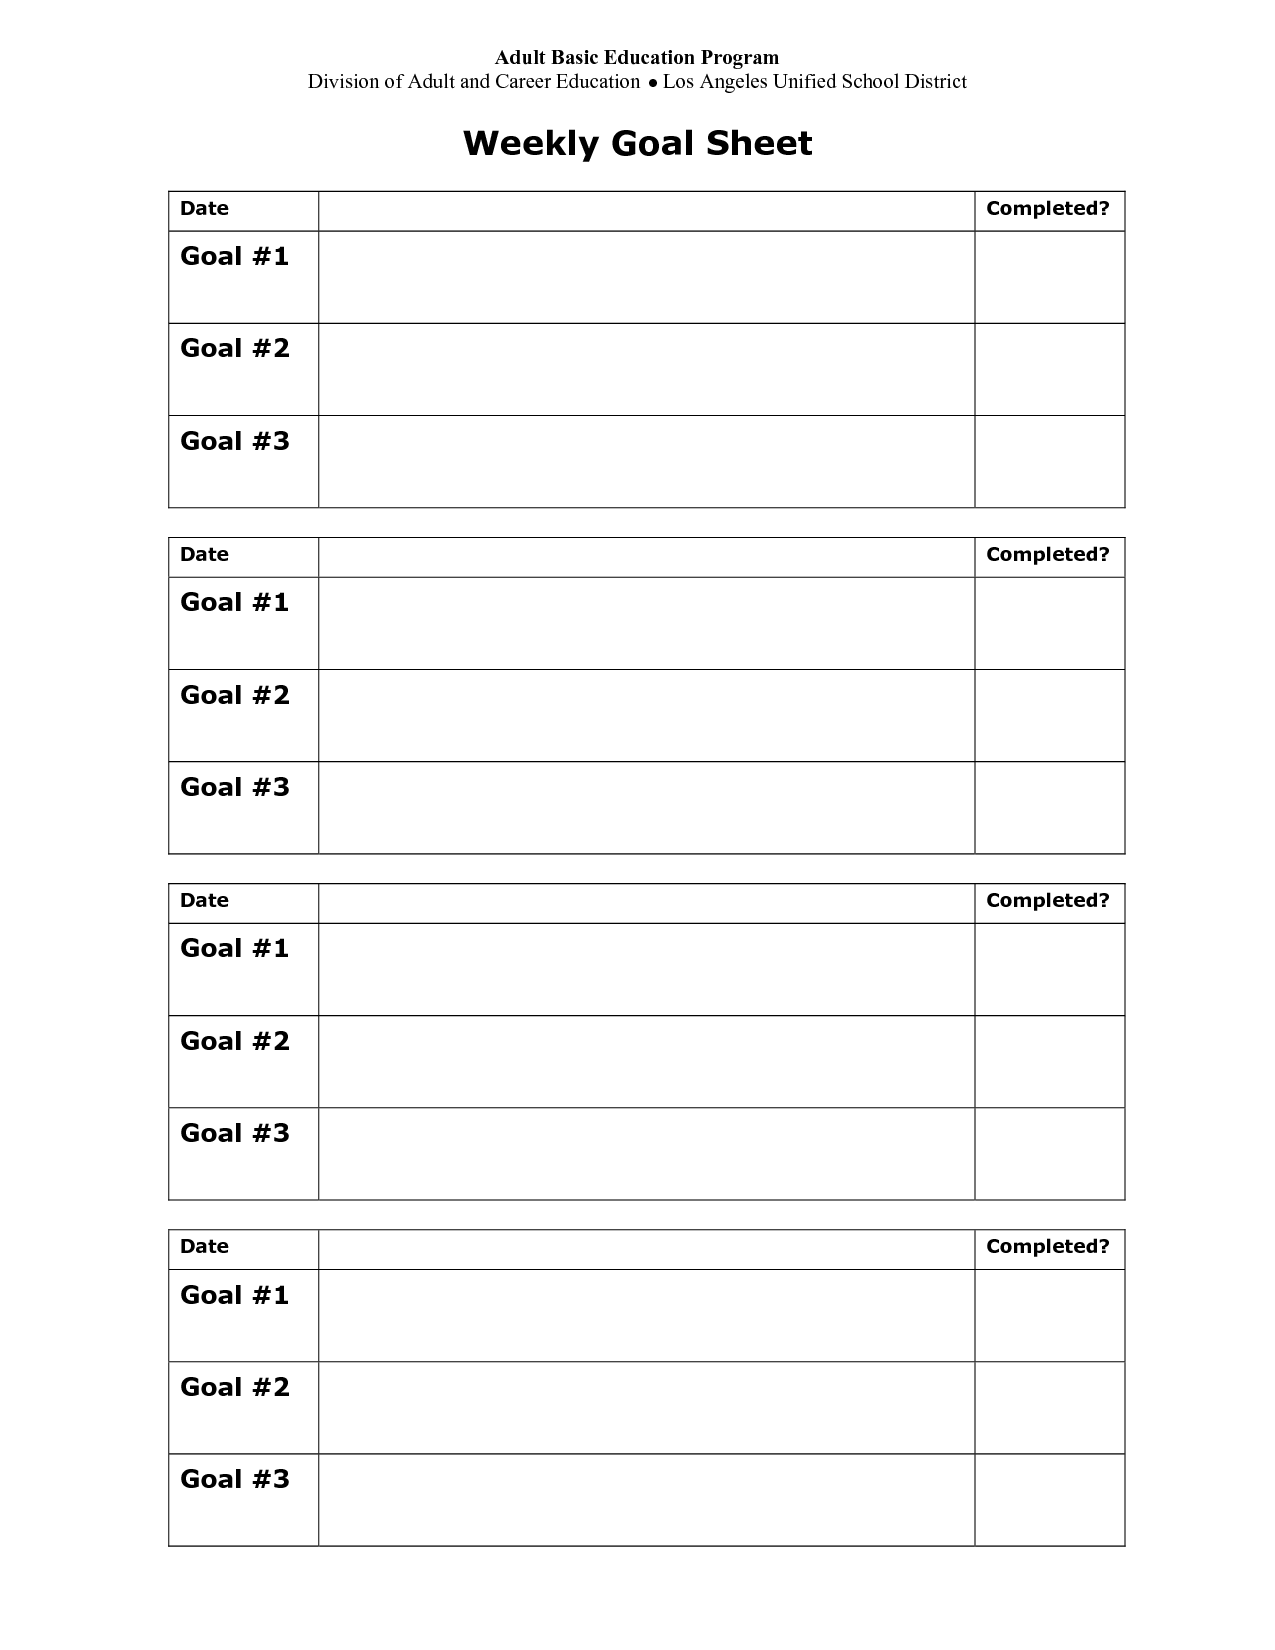 13 Best Images of Goals And Objectives Worksheet - Goal Setting ...